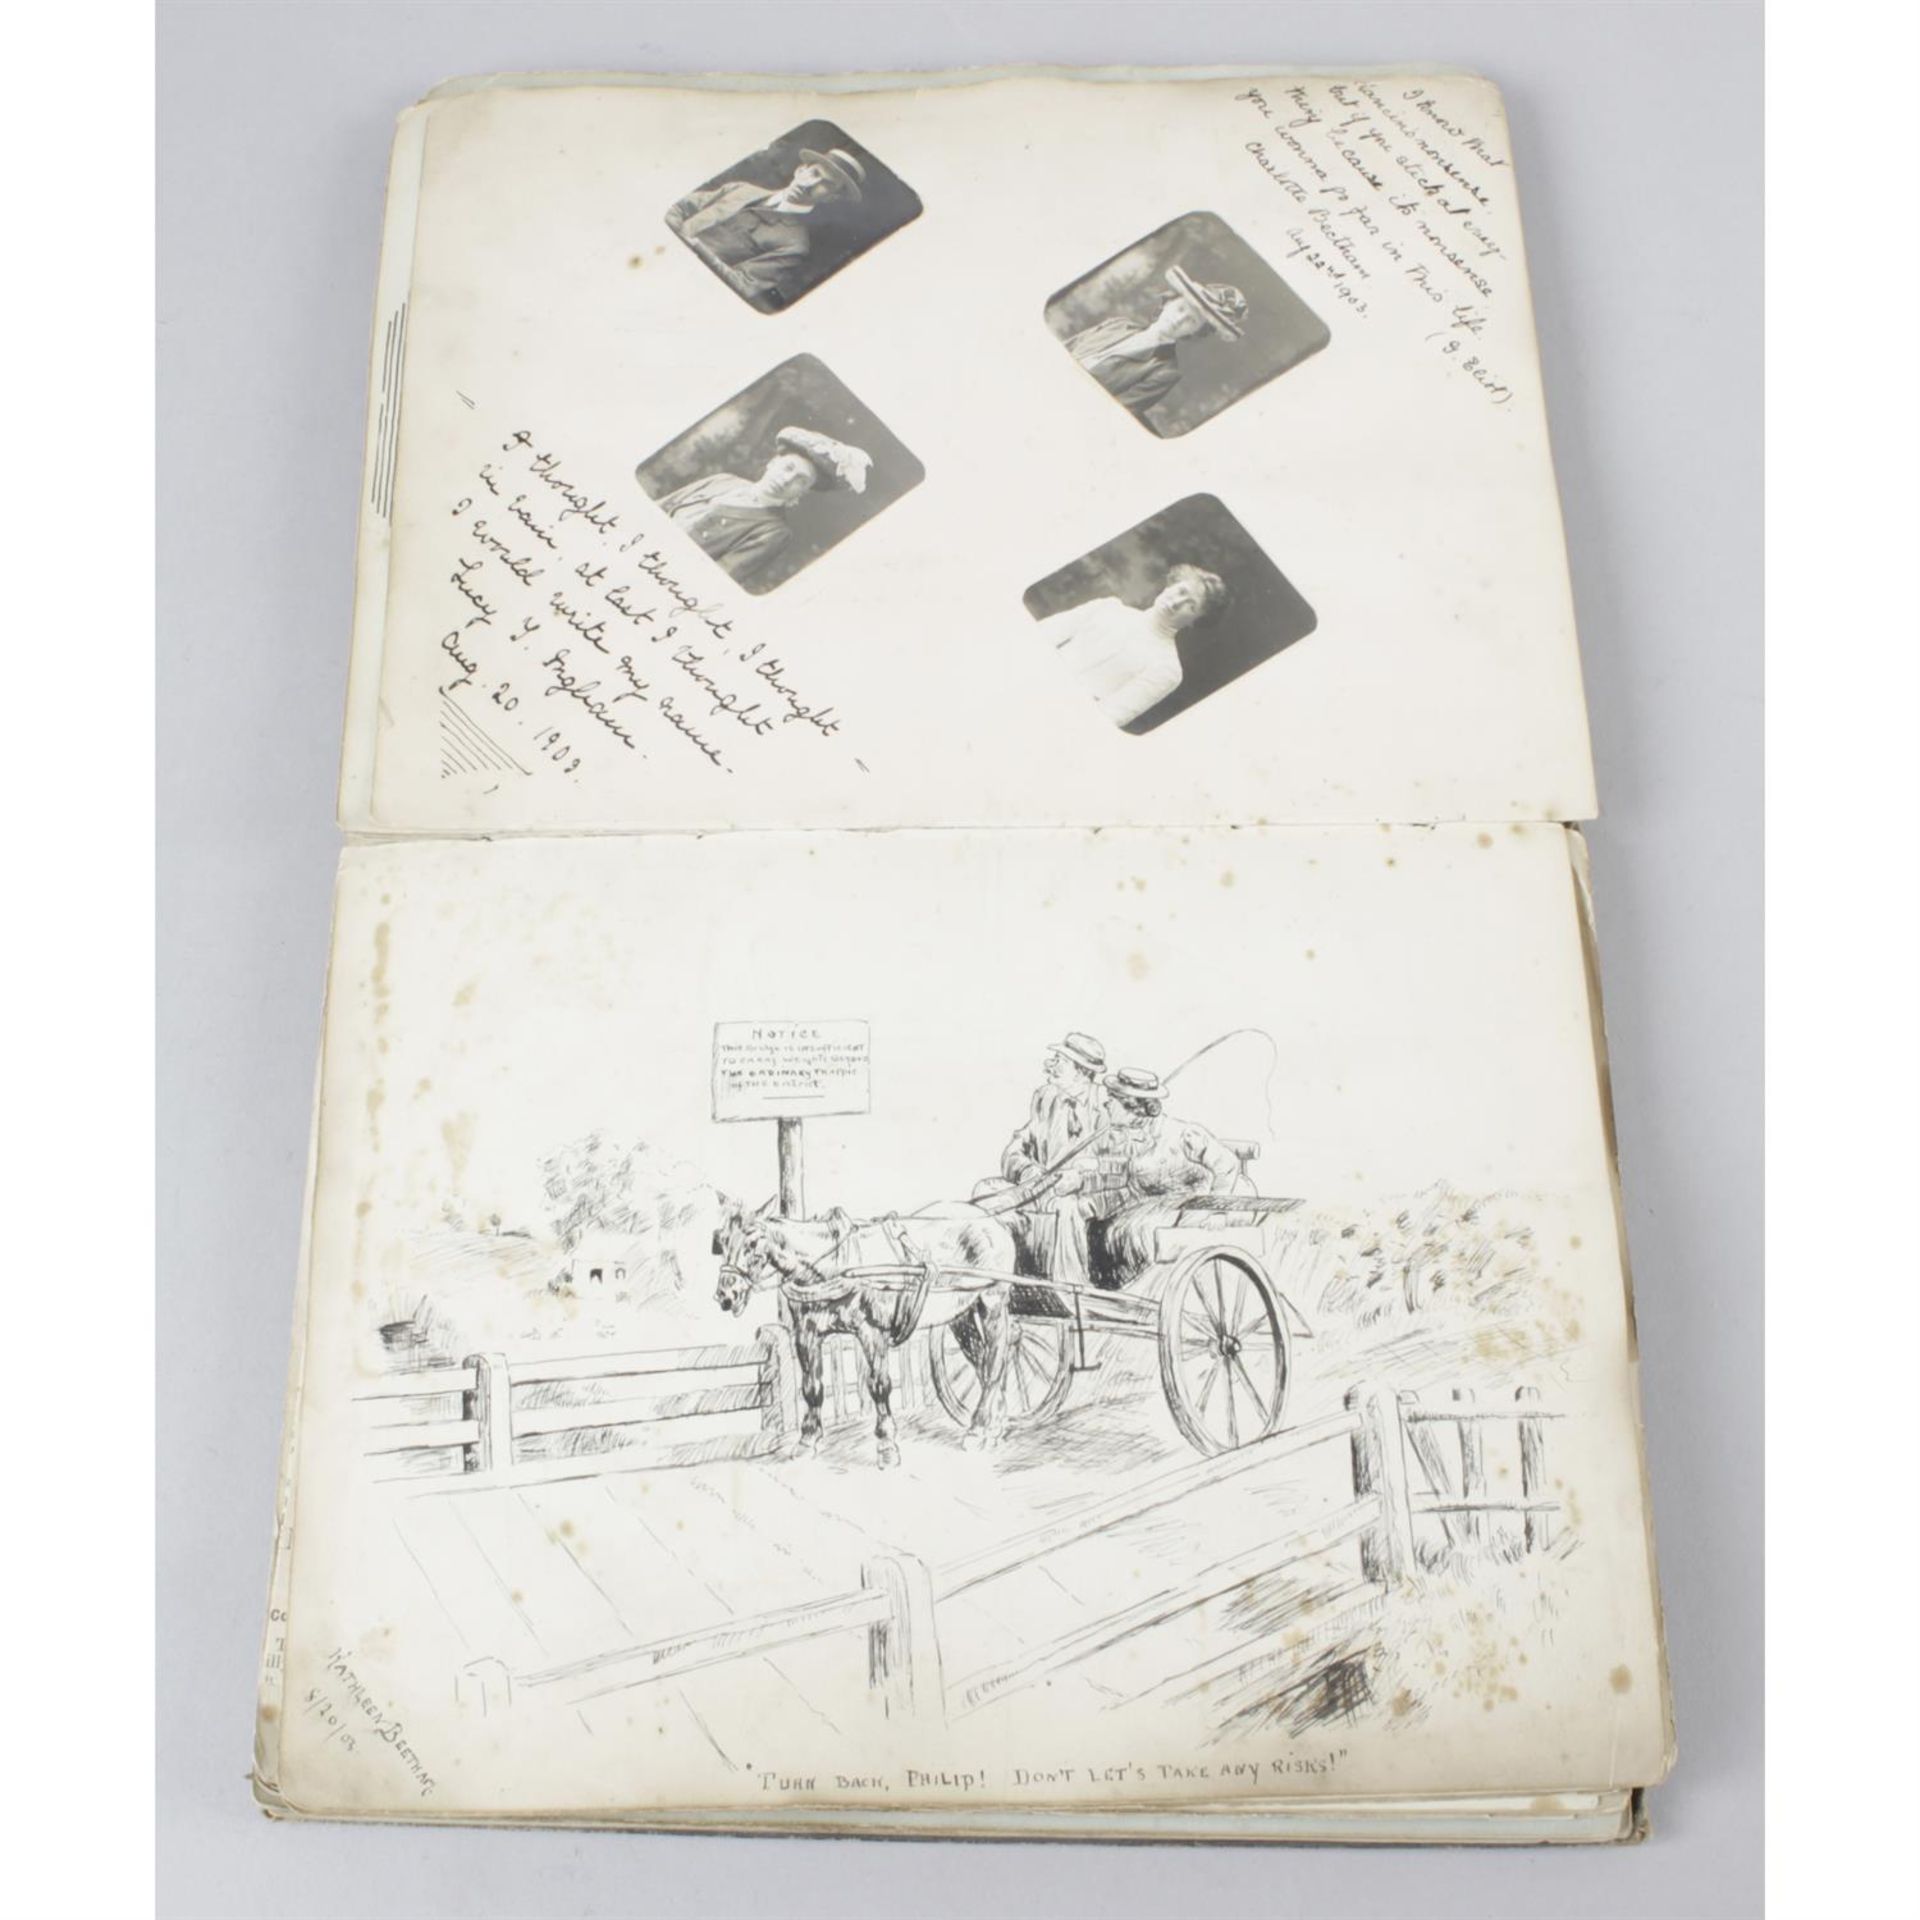 An early 20th century sketchbook album.